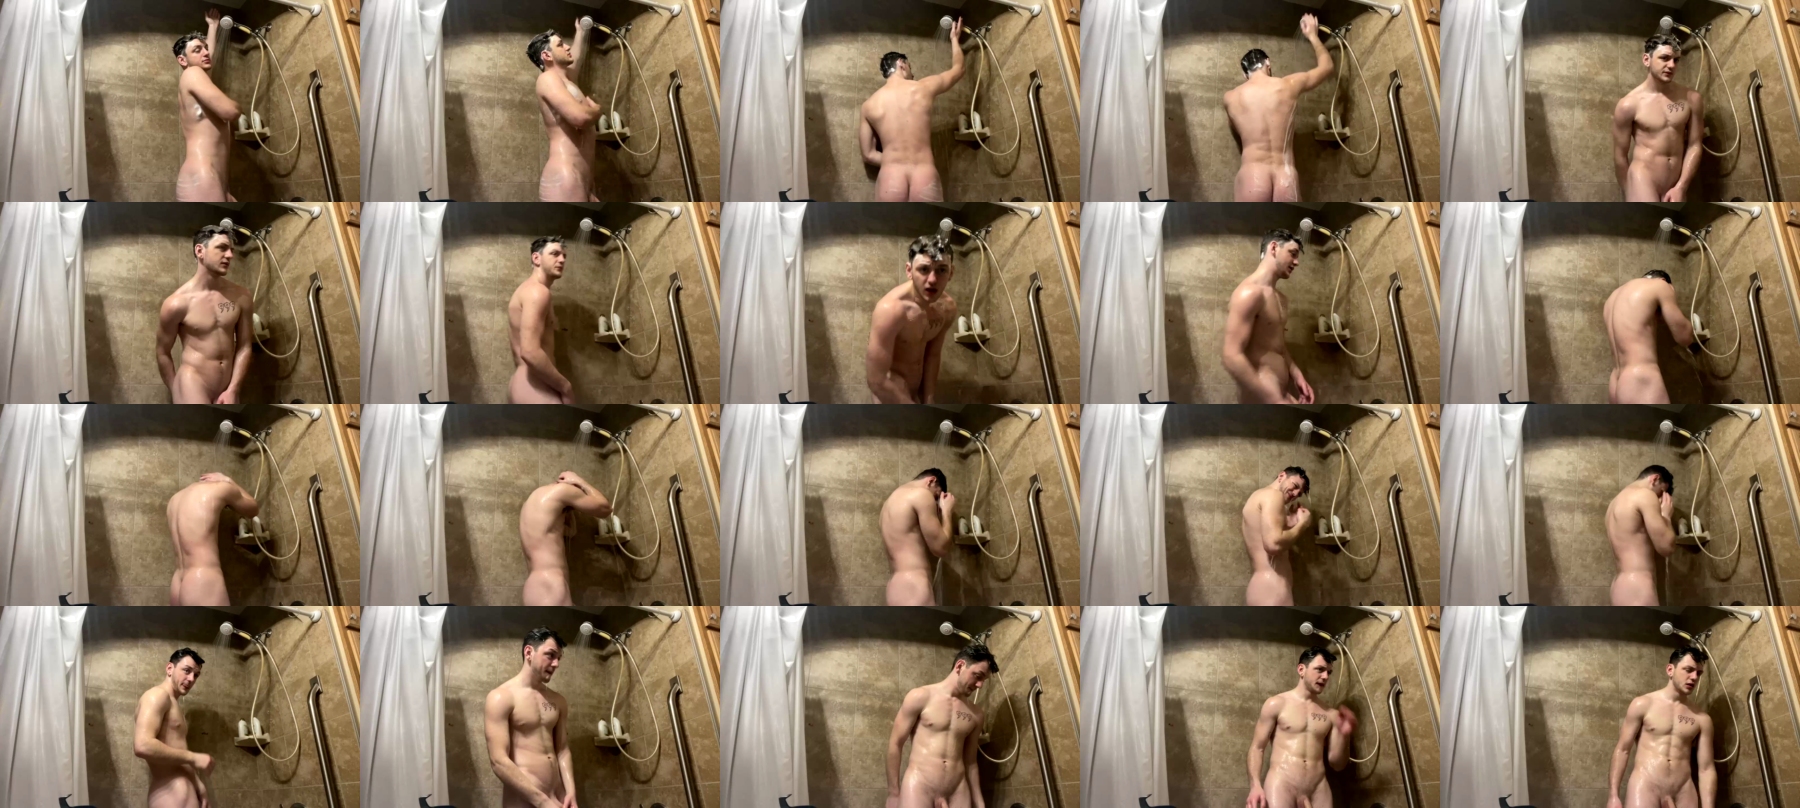 Sexylax69  10-12-2021 Male Topless